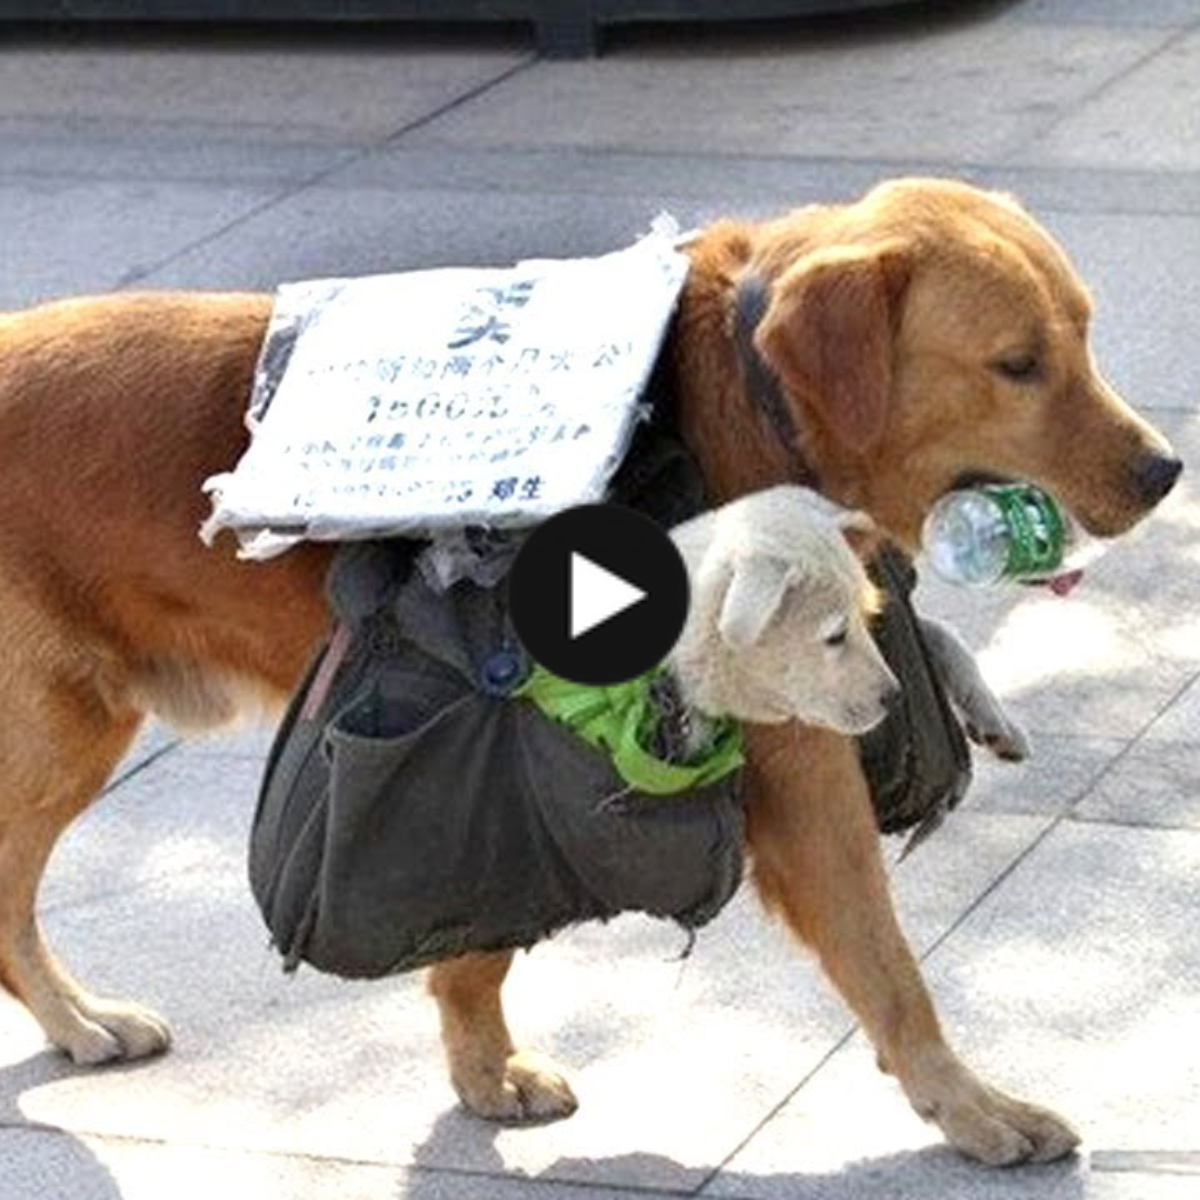 A destitute dog leads her puppies on walks throughout the city to collect recyclables and trade them for money so she may purchase food for her two small children.